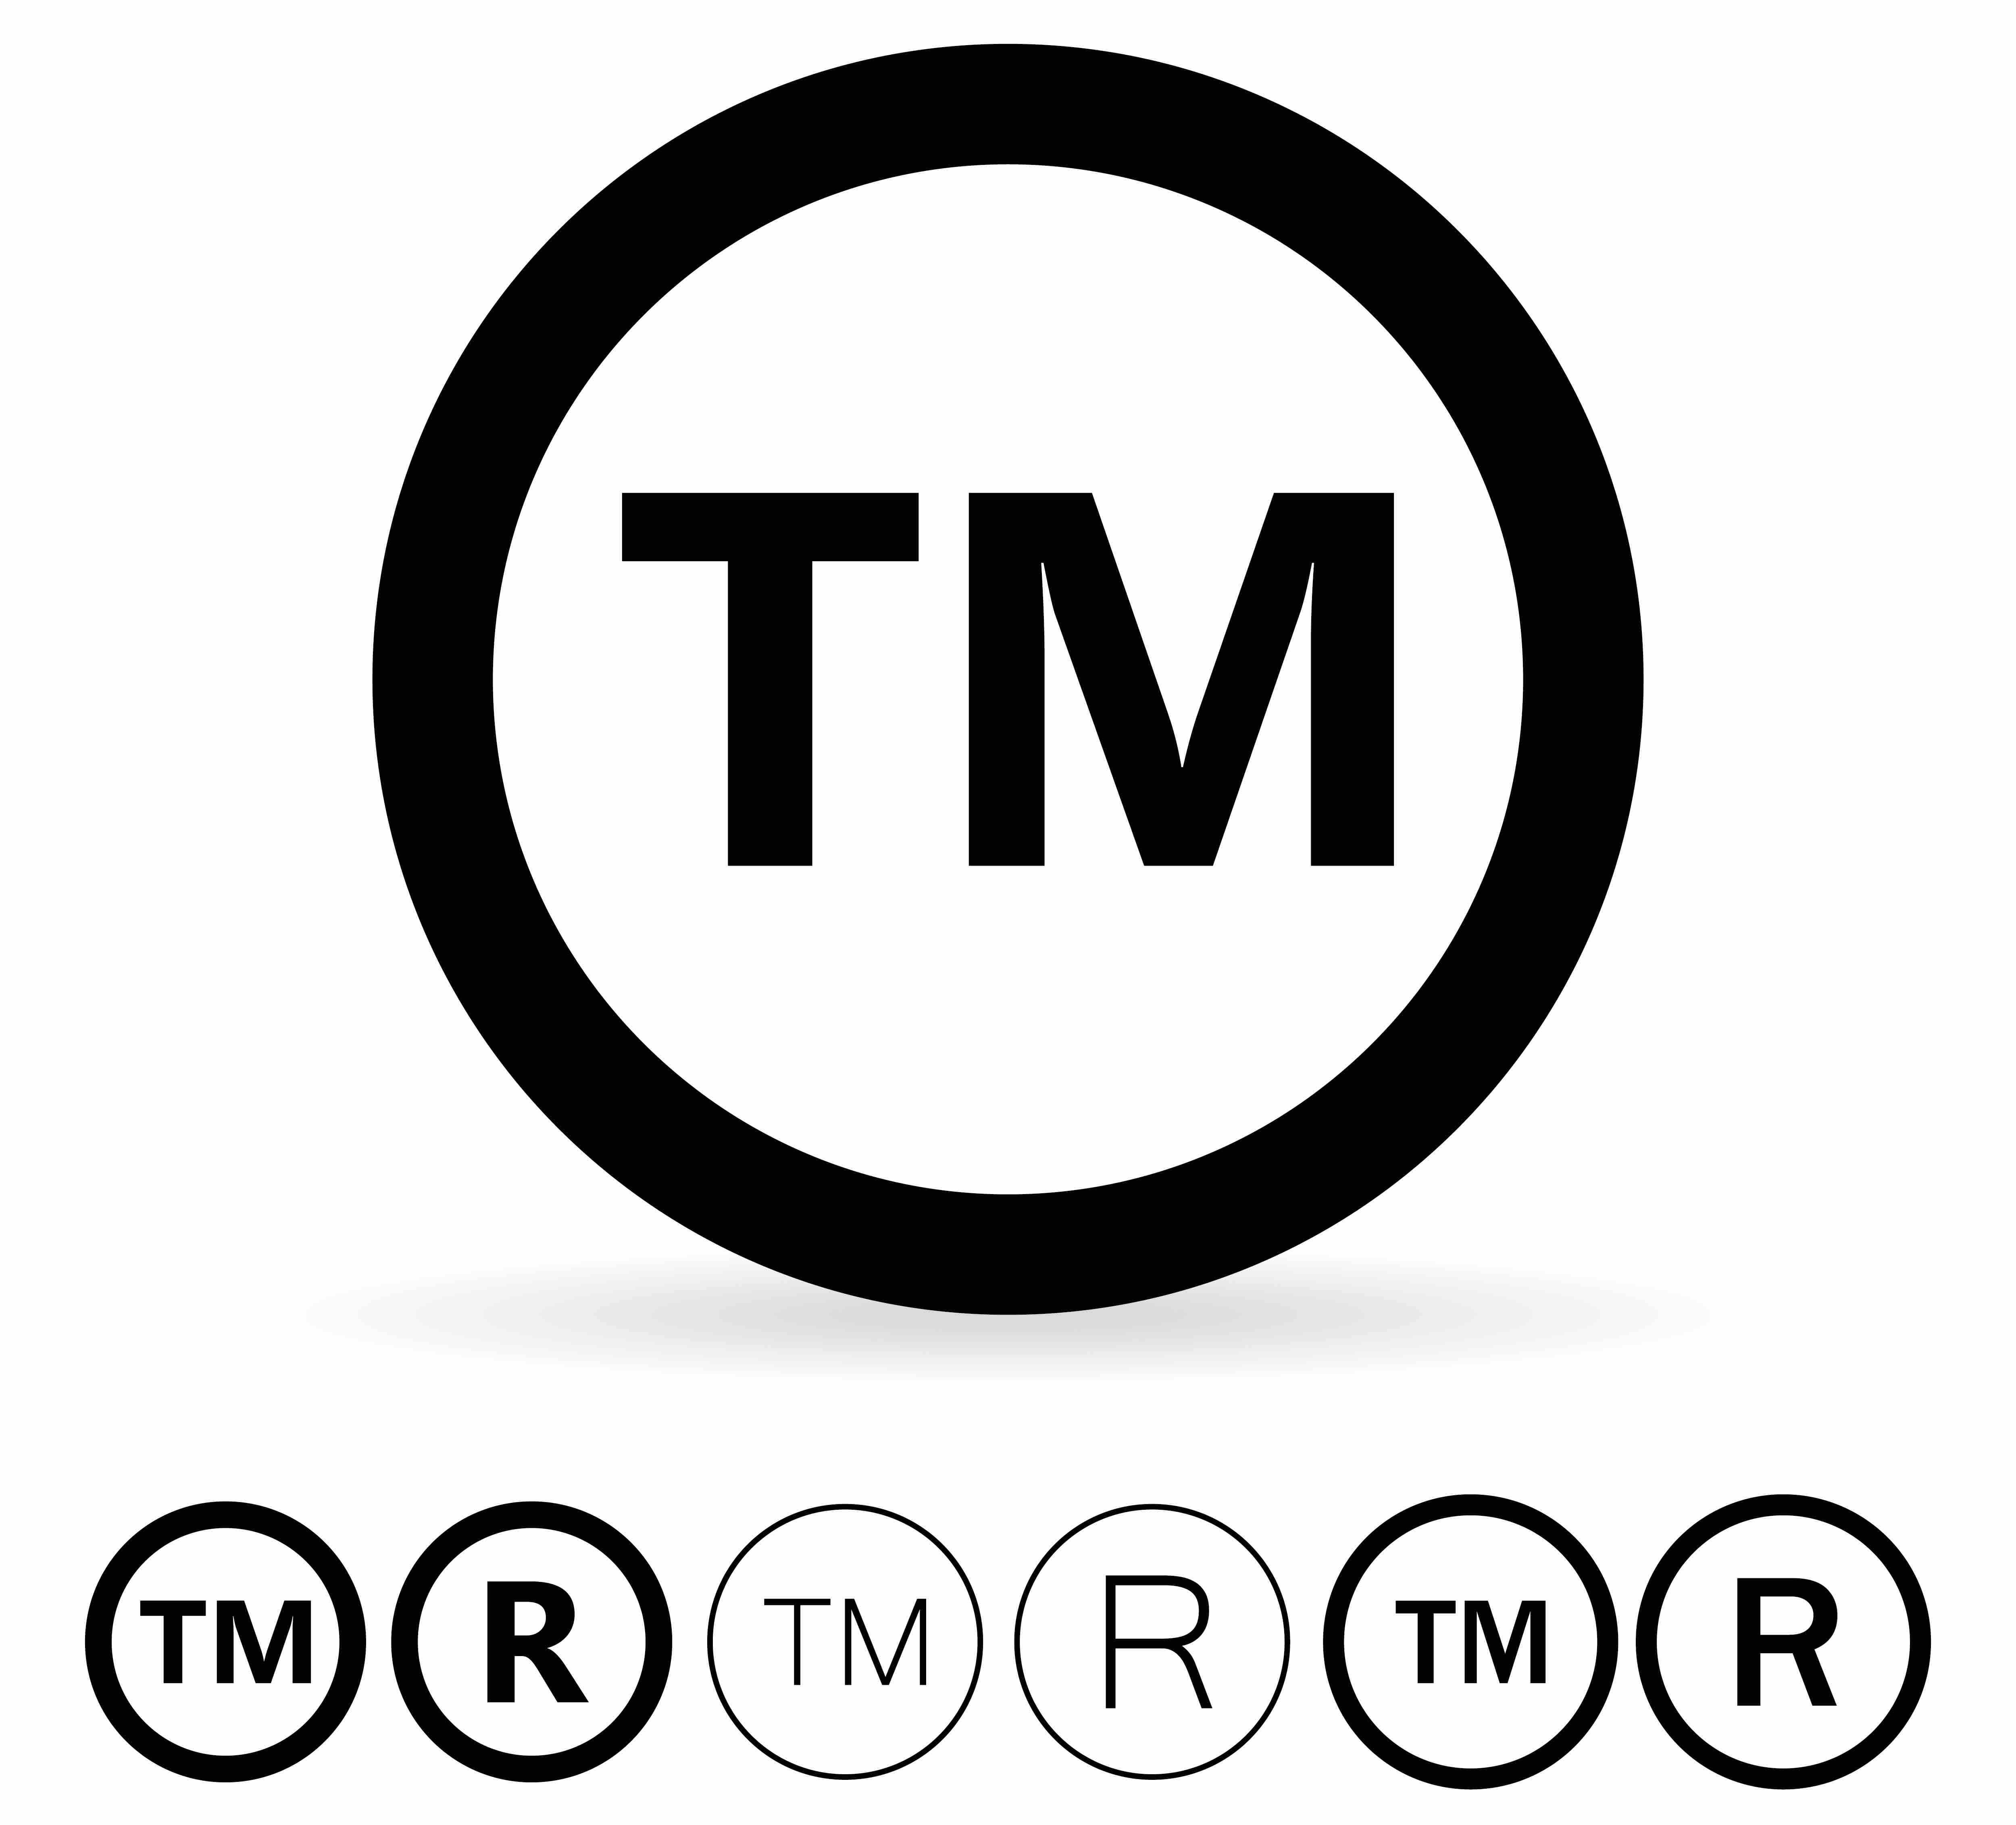 How To Use Trademark And Registered Trademark Symbols Cooper Mills